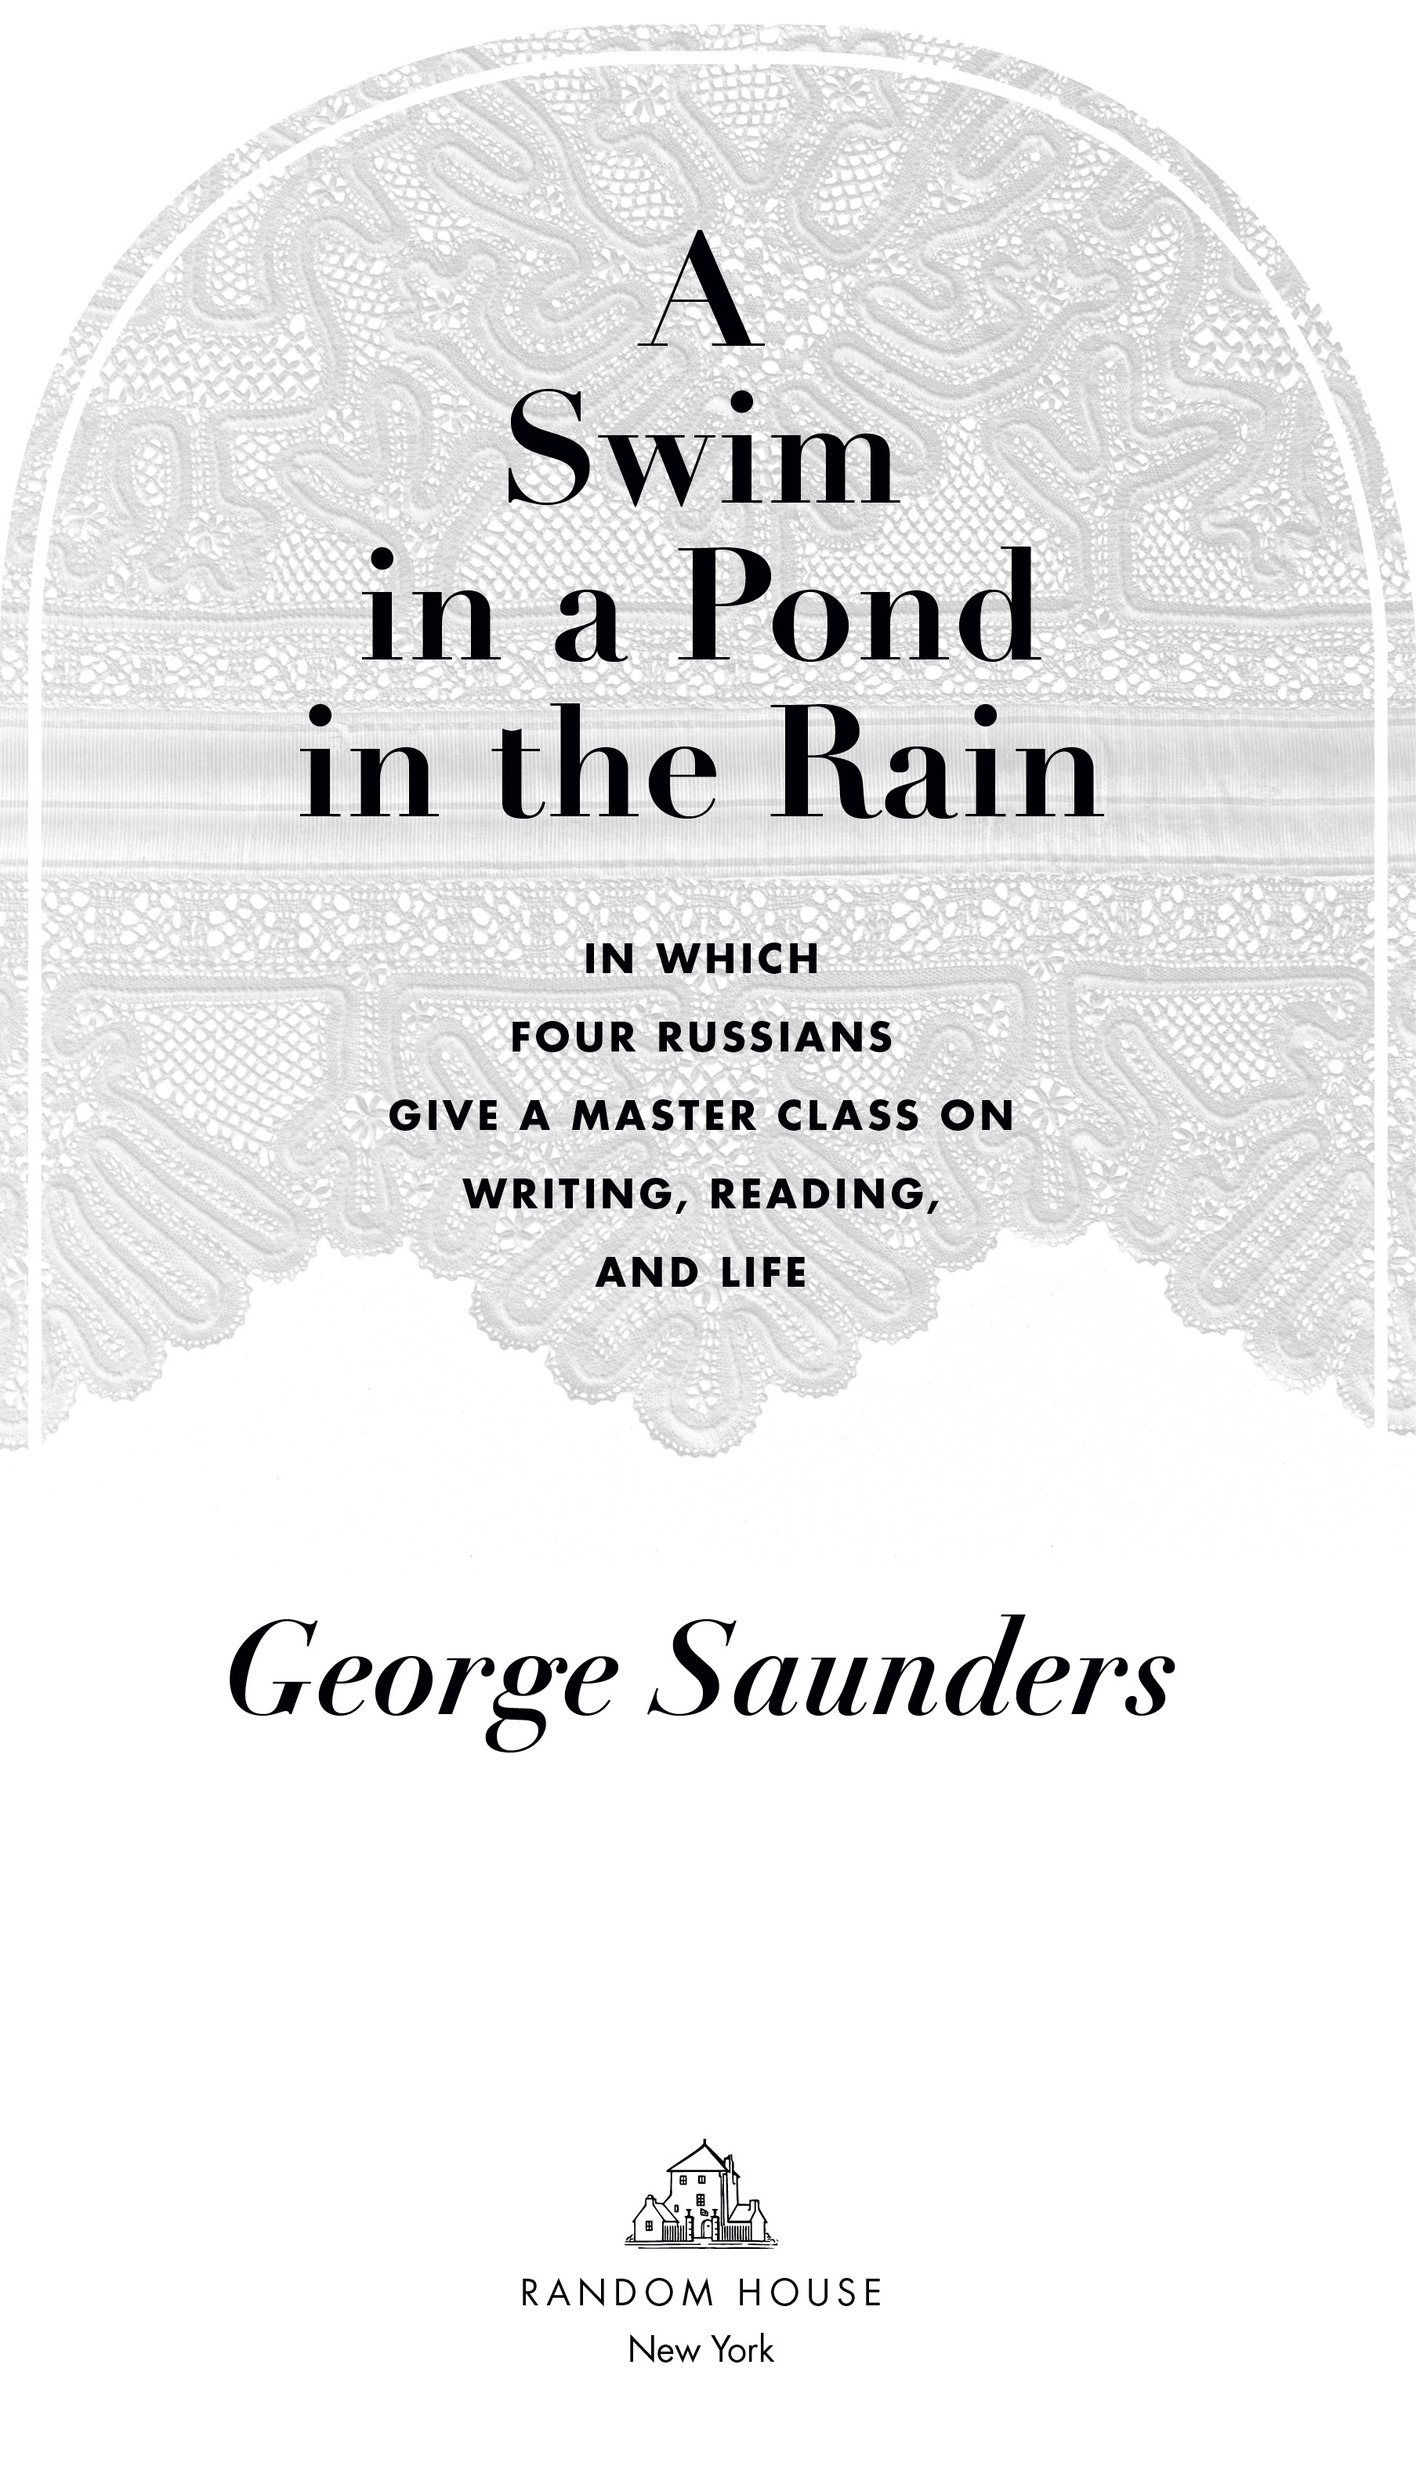 Book Title, A Swim in a Pond in the Rain, Subtitle, In Which Four Russians Give a Master Class on Writing, Reading, and Life, Author, George Saunders, Imprint, Random House